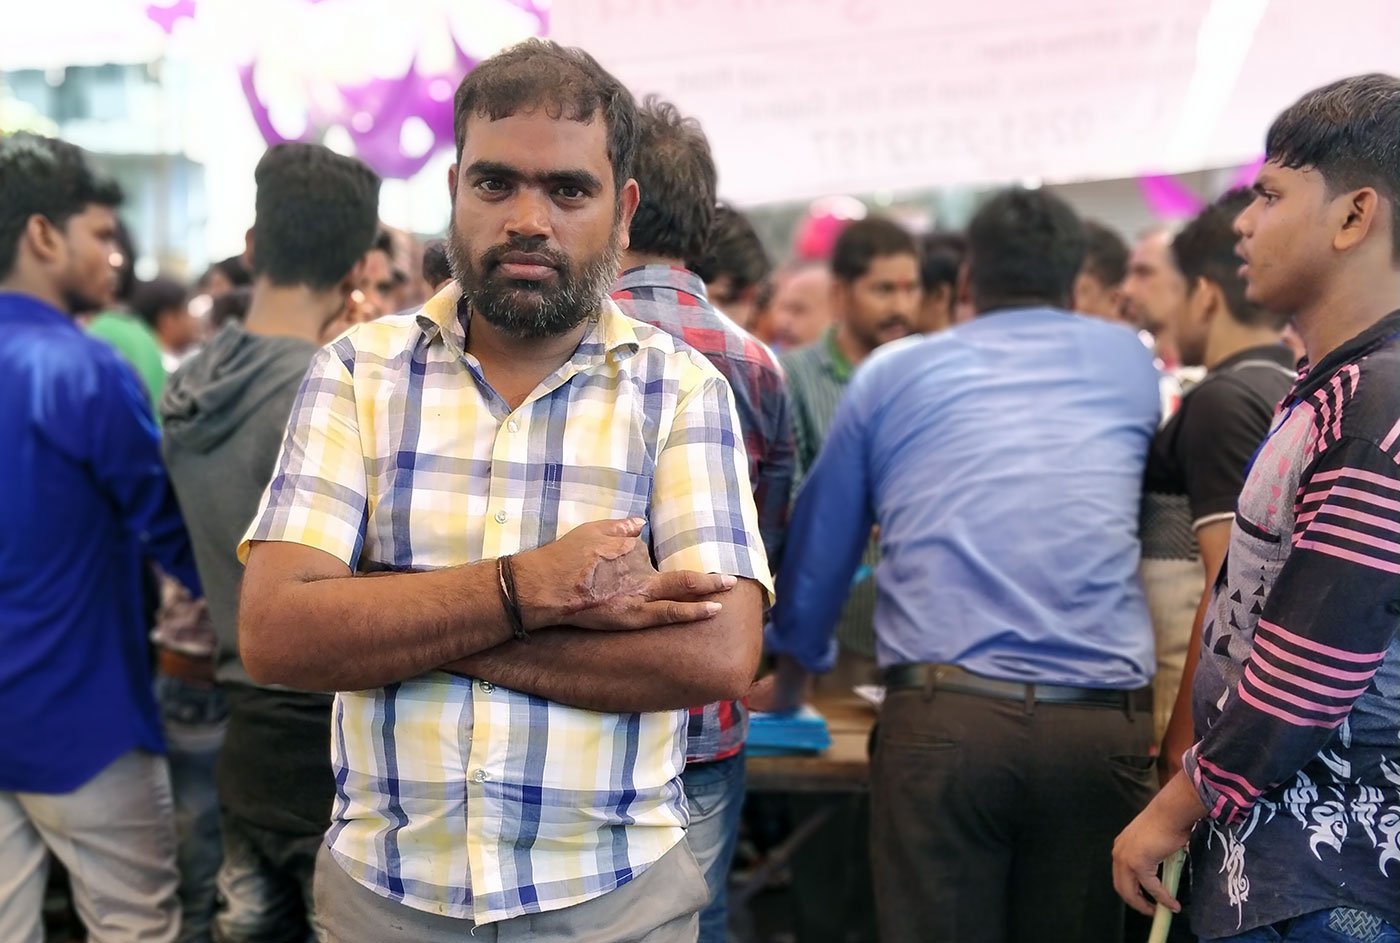 Rushikesh Rout, 38, a former powerloom unit worker lost three fingers in a freak accident in June last year. He now works as a security guard, carrying with him little hope to be compensated for his lost fingers. 